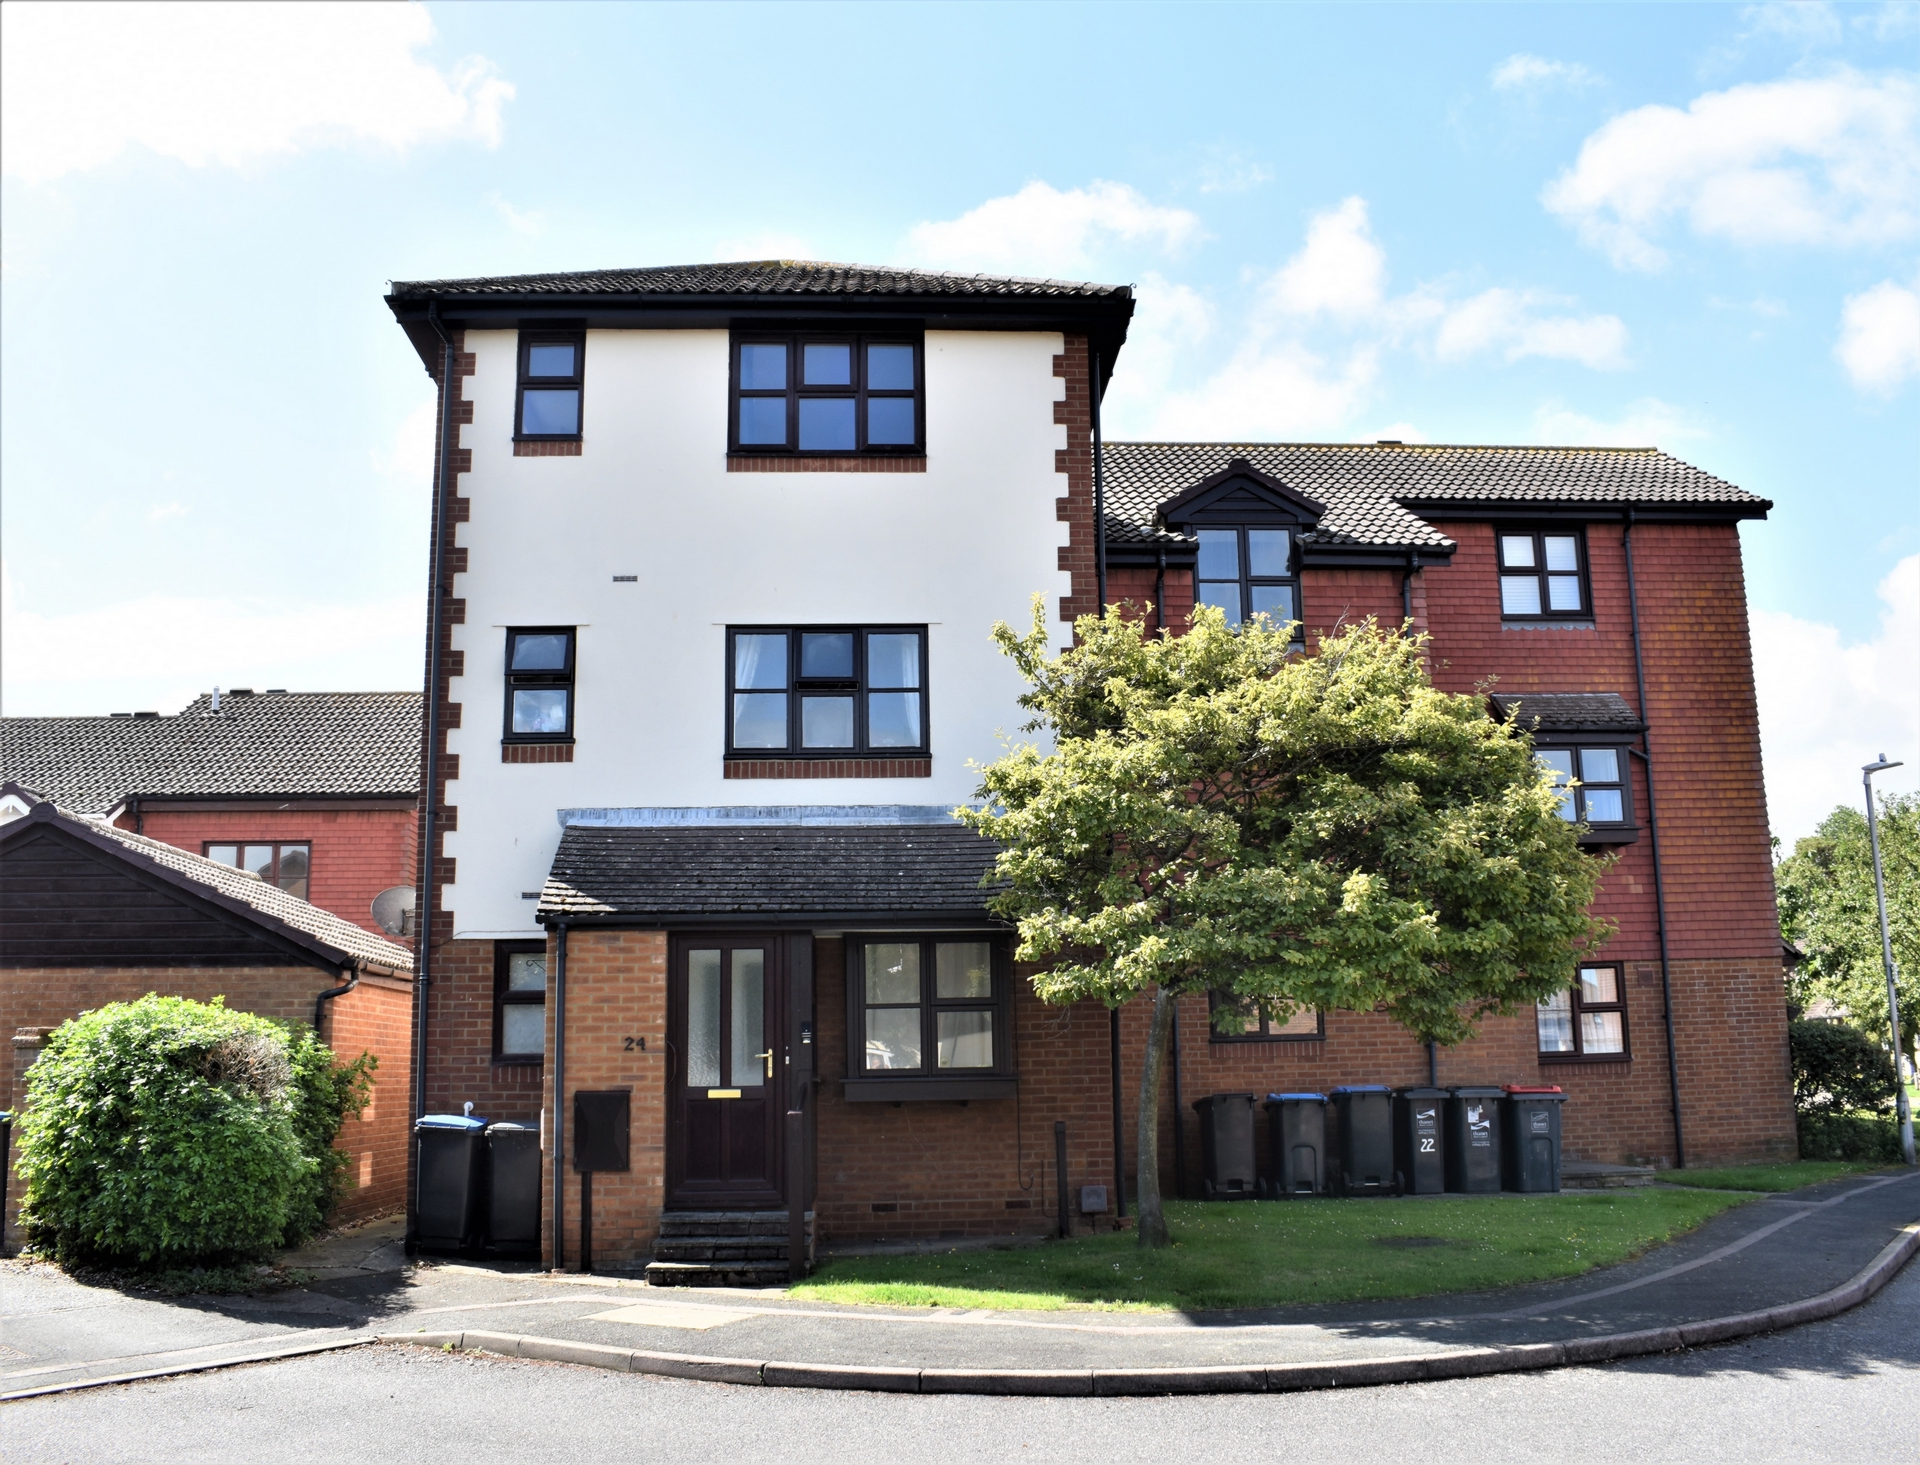 Large One bedroom top floor flat - Located within the ever popular and peaceful cul-de-sac of Brandon Way, Birchington.